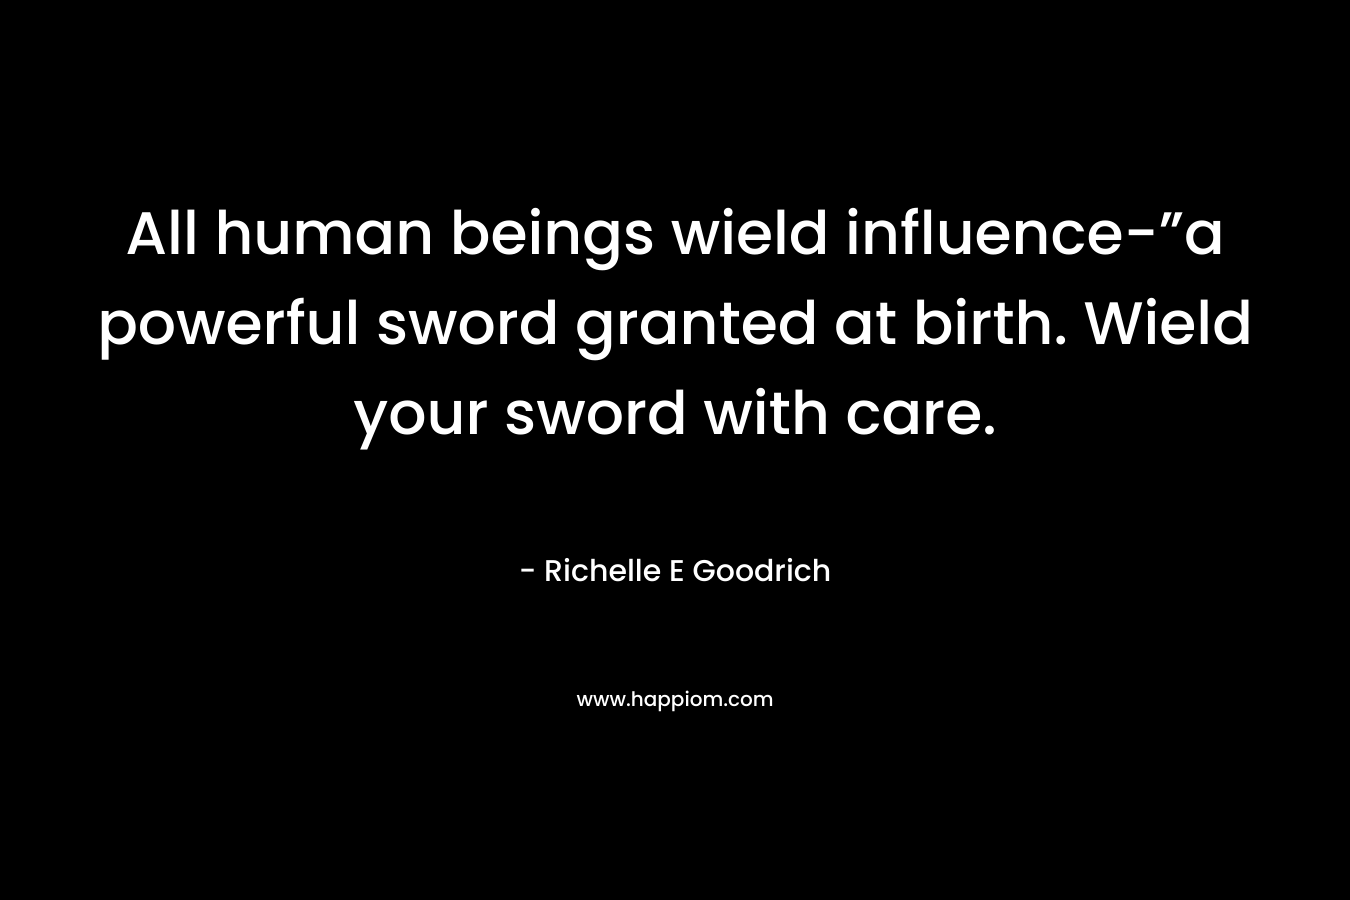 All human beings wield influence-”a powerful sword granted at birth. Wield your sword with care.